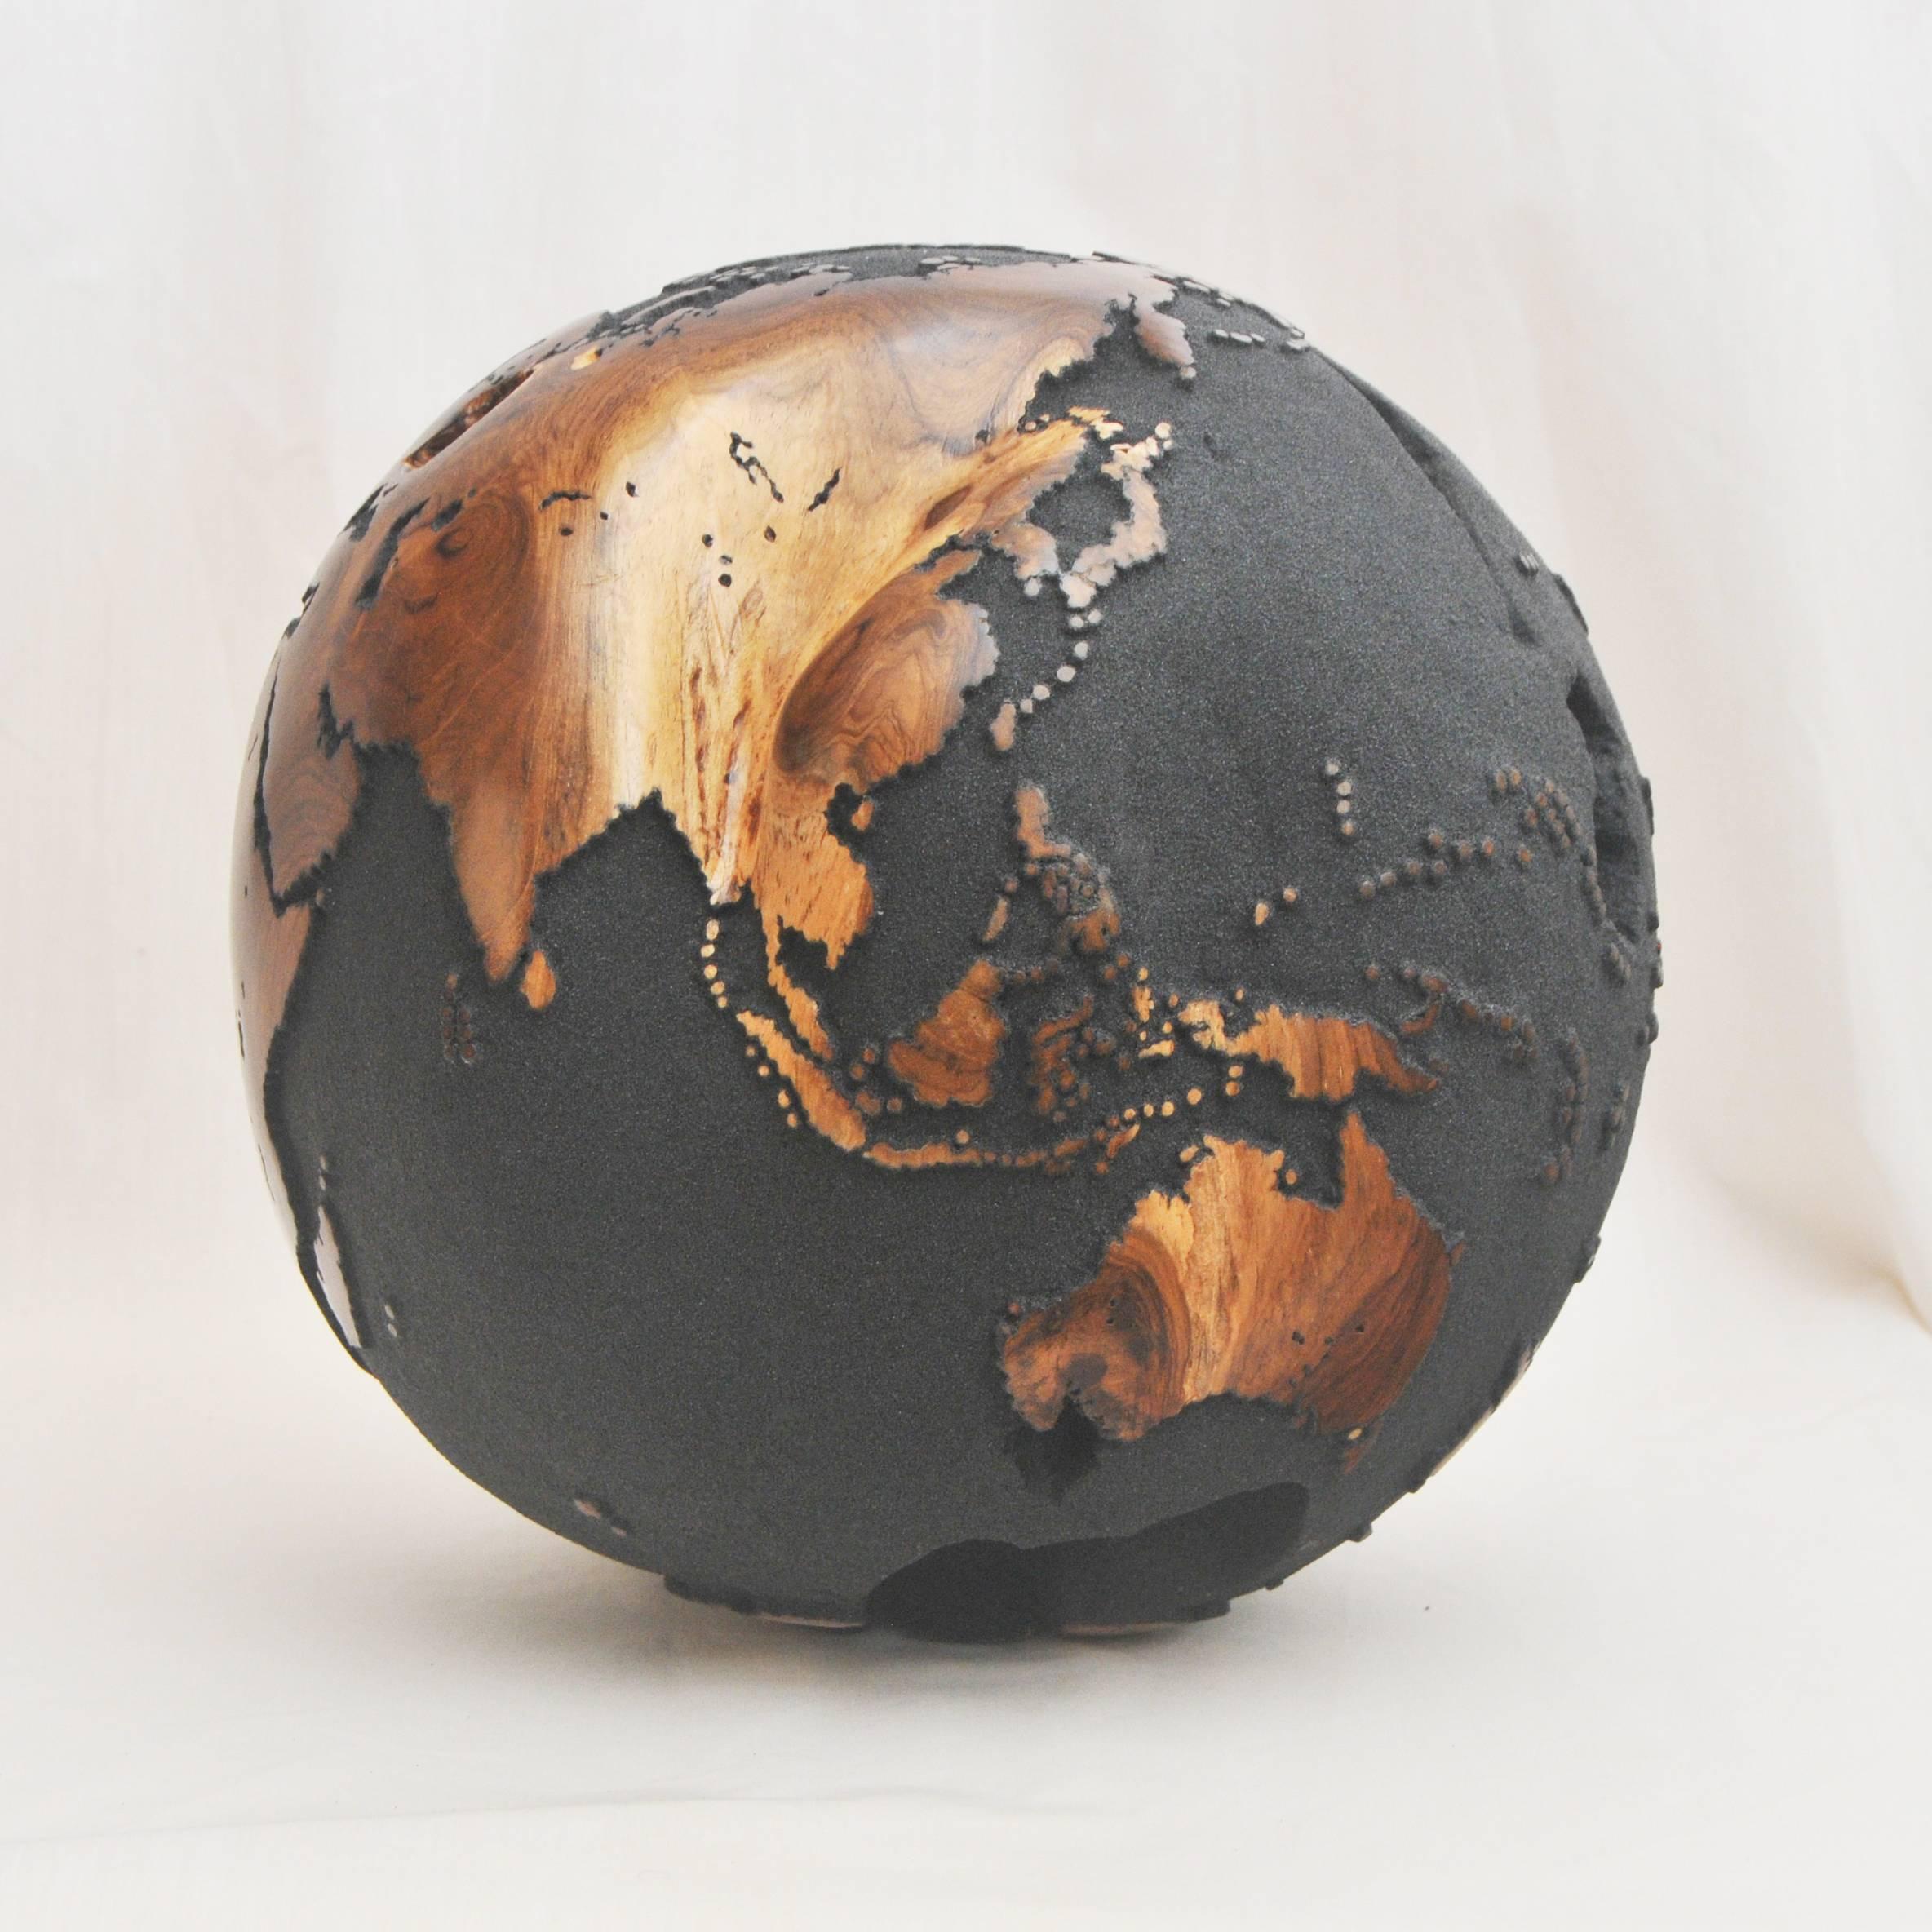 One of a kind globe
Hand-carved in a solid piece of teak root
Finish: Volcanic sand
Mounted on turning base.
 